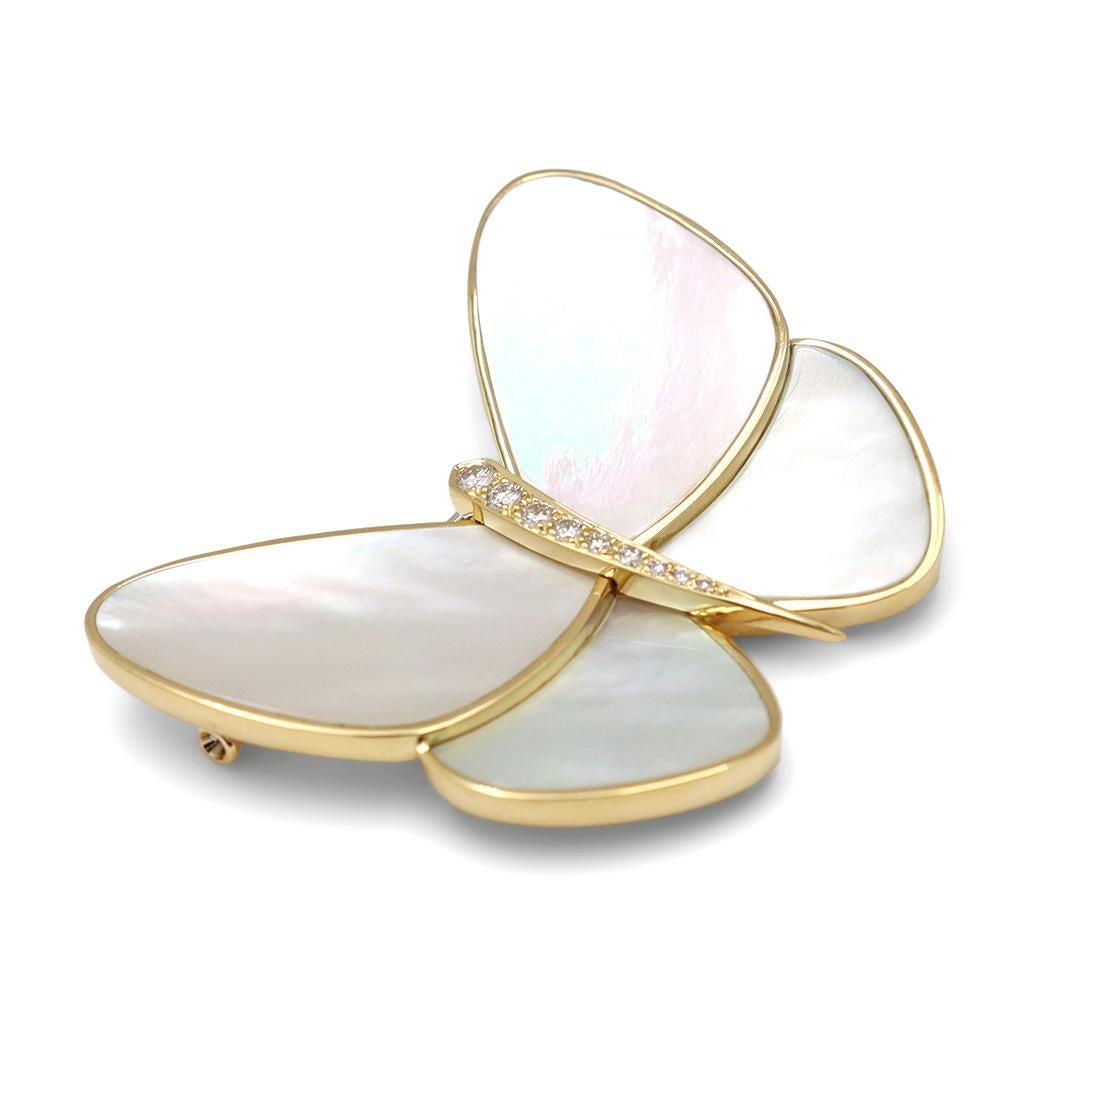 Authentic Van Cleef & Arpels pin crafted in 18 karat yellow gold.  The wings are comprised of carved white mother-or-pearl. The body of the butterfly is set with 9 round brilliant cut diamonds weighing an estimated 0.23 carat total weight (DEF